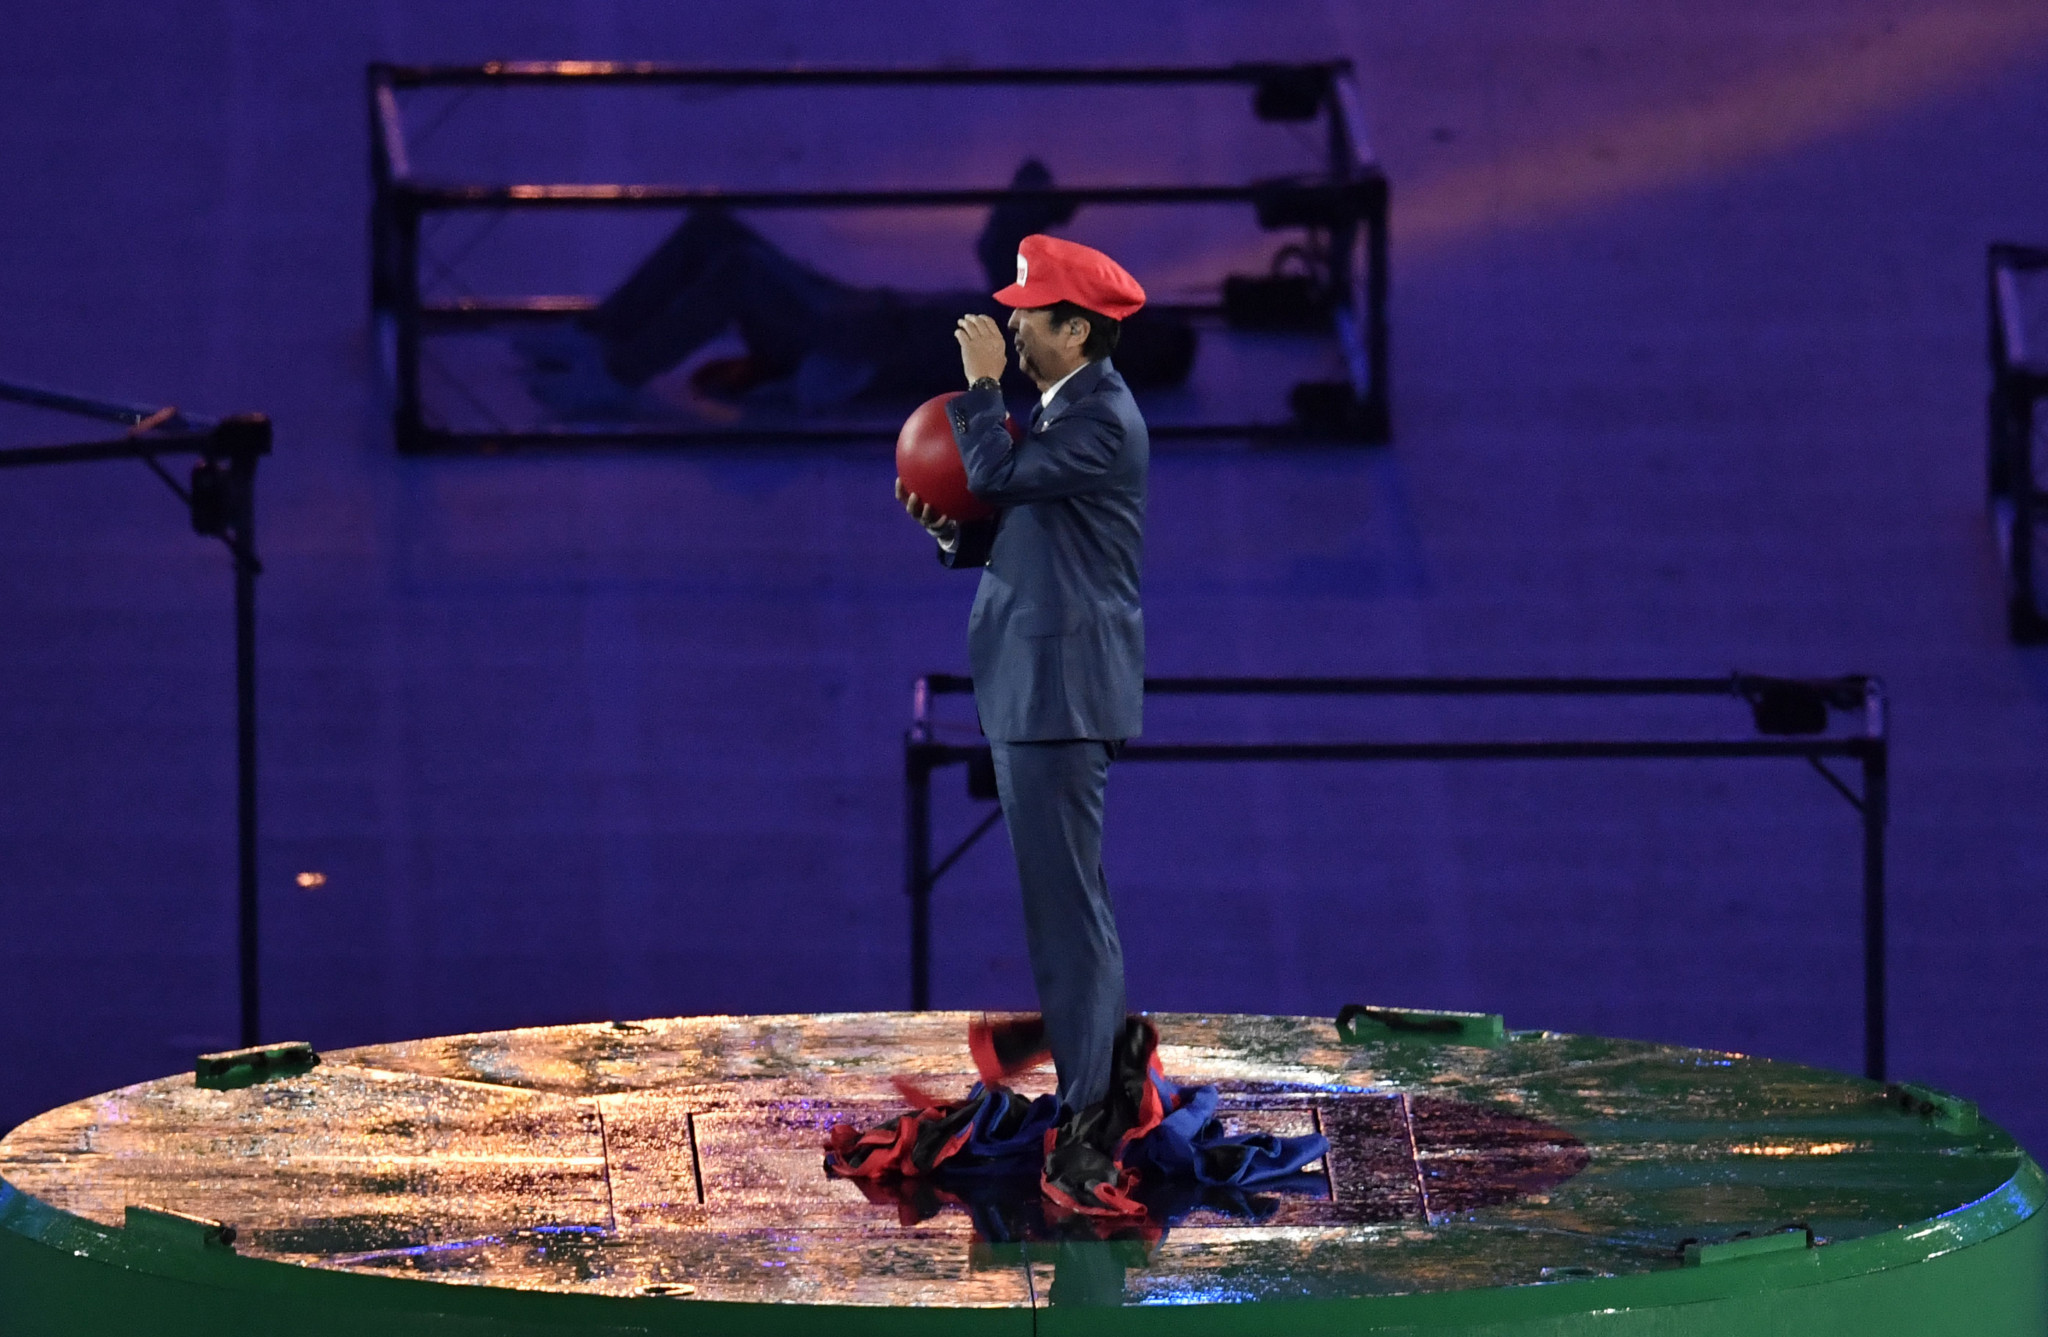 Shinzō Abe's appearance as Super Mario at the Rio 2016 Closing Ceremony showed his commitment to Tokyo 2020 ©Getty Images